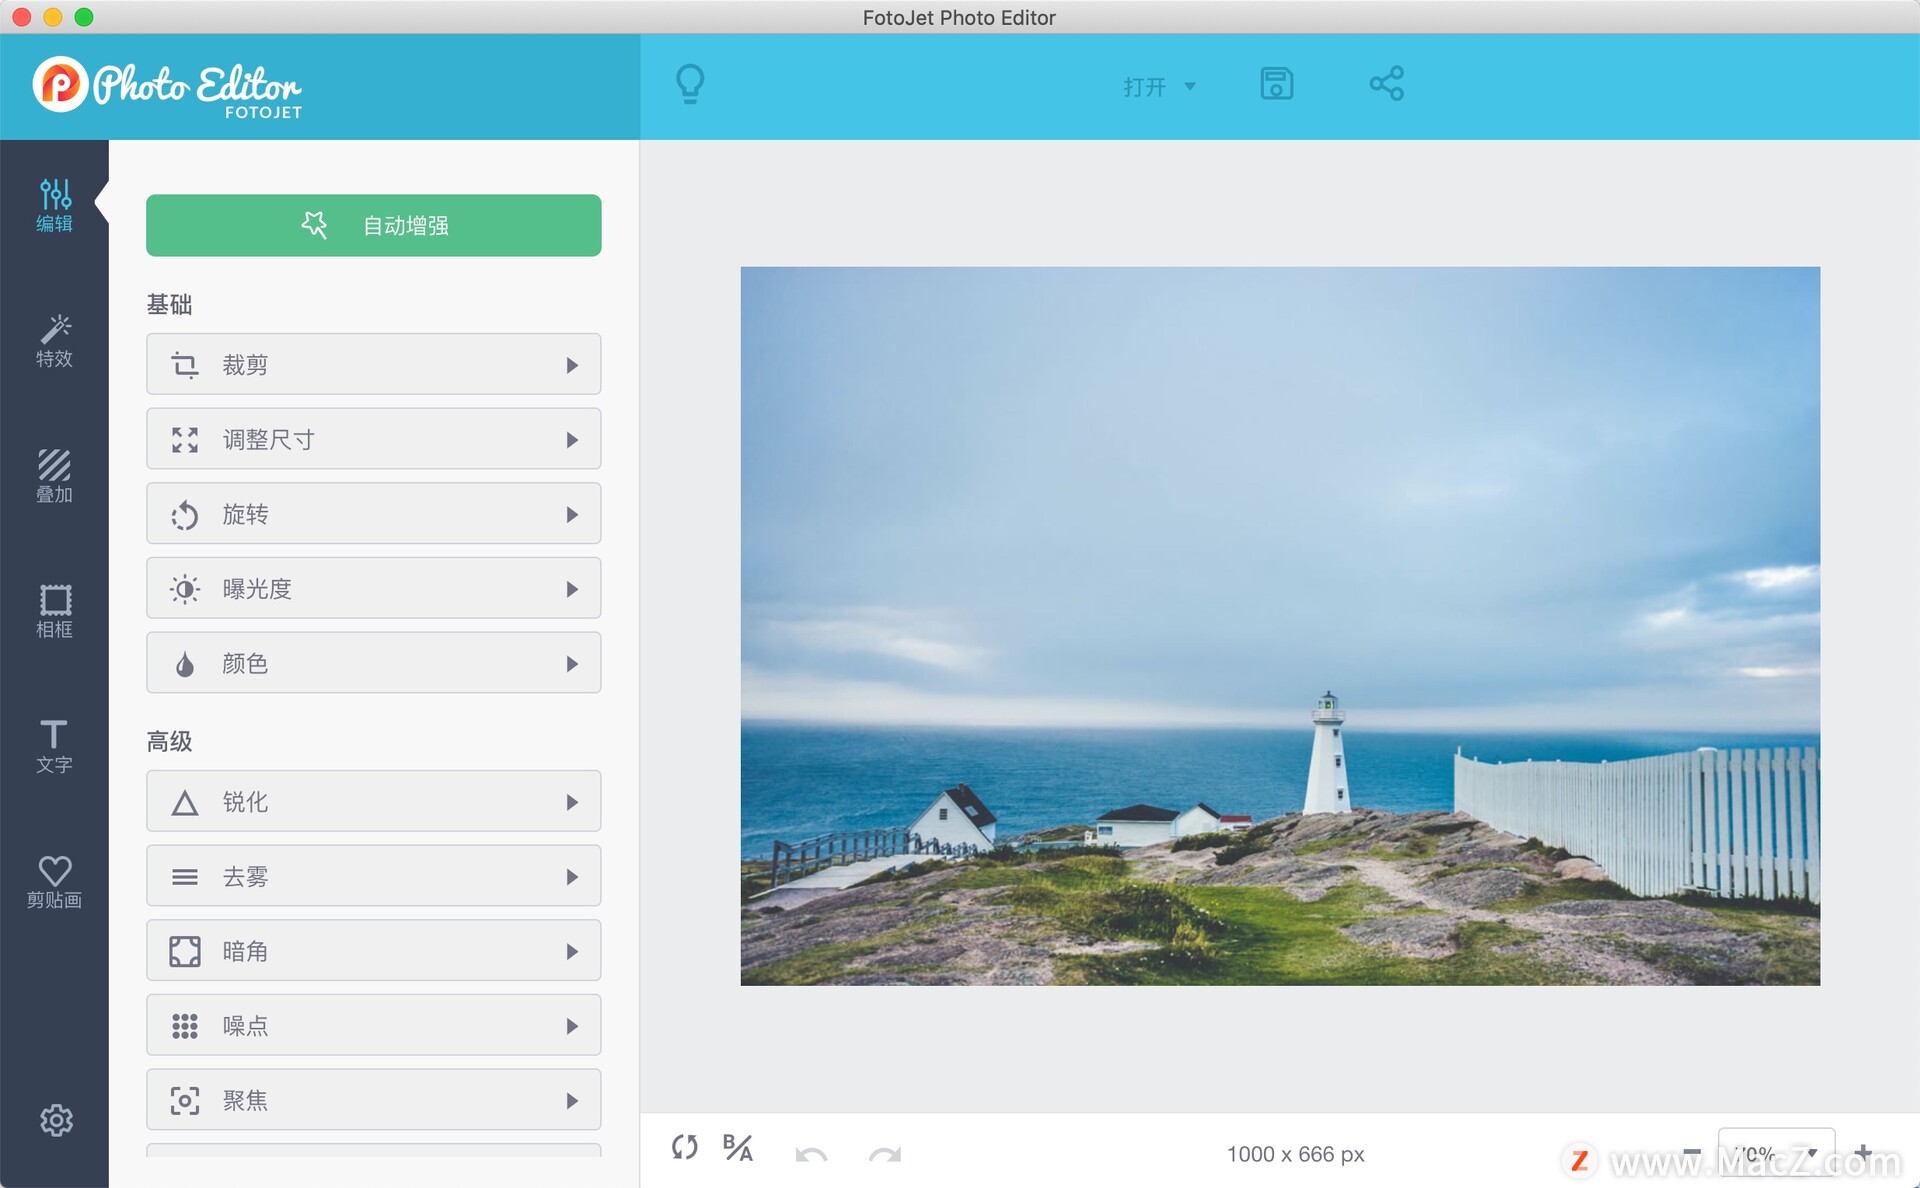 download the last version for mac FotoJet Photo Editor 1.1.7